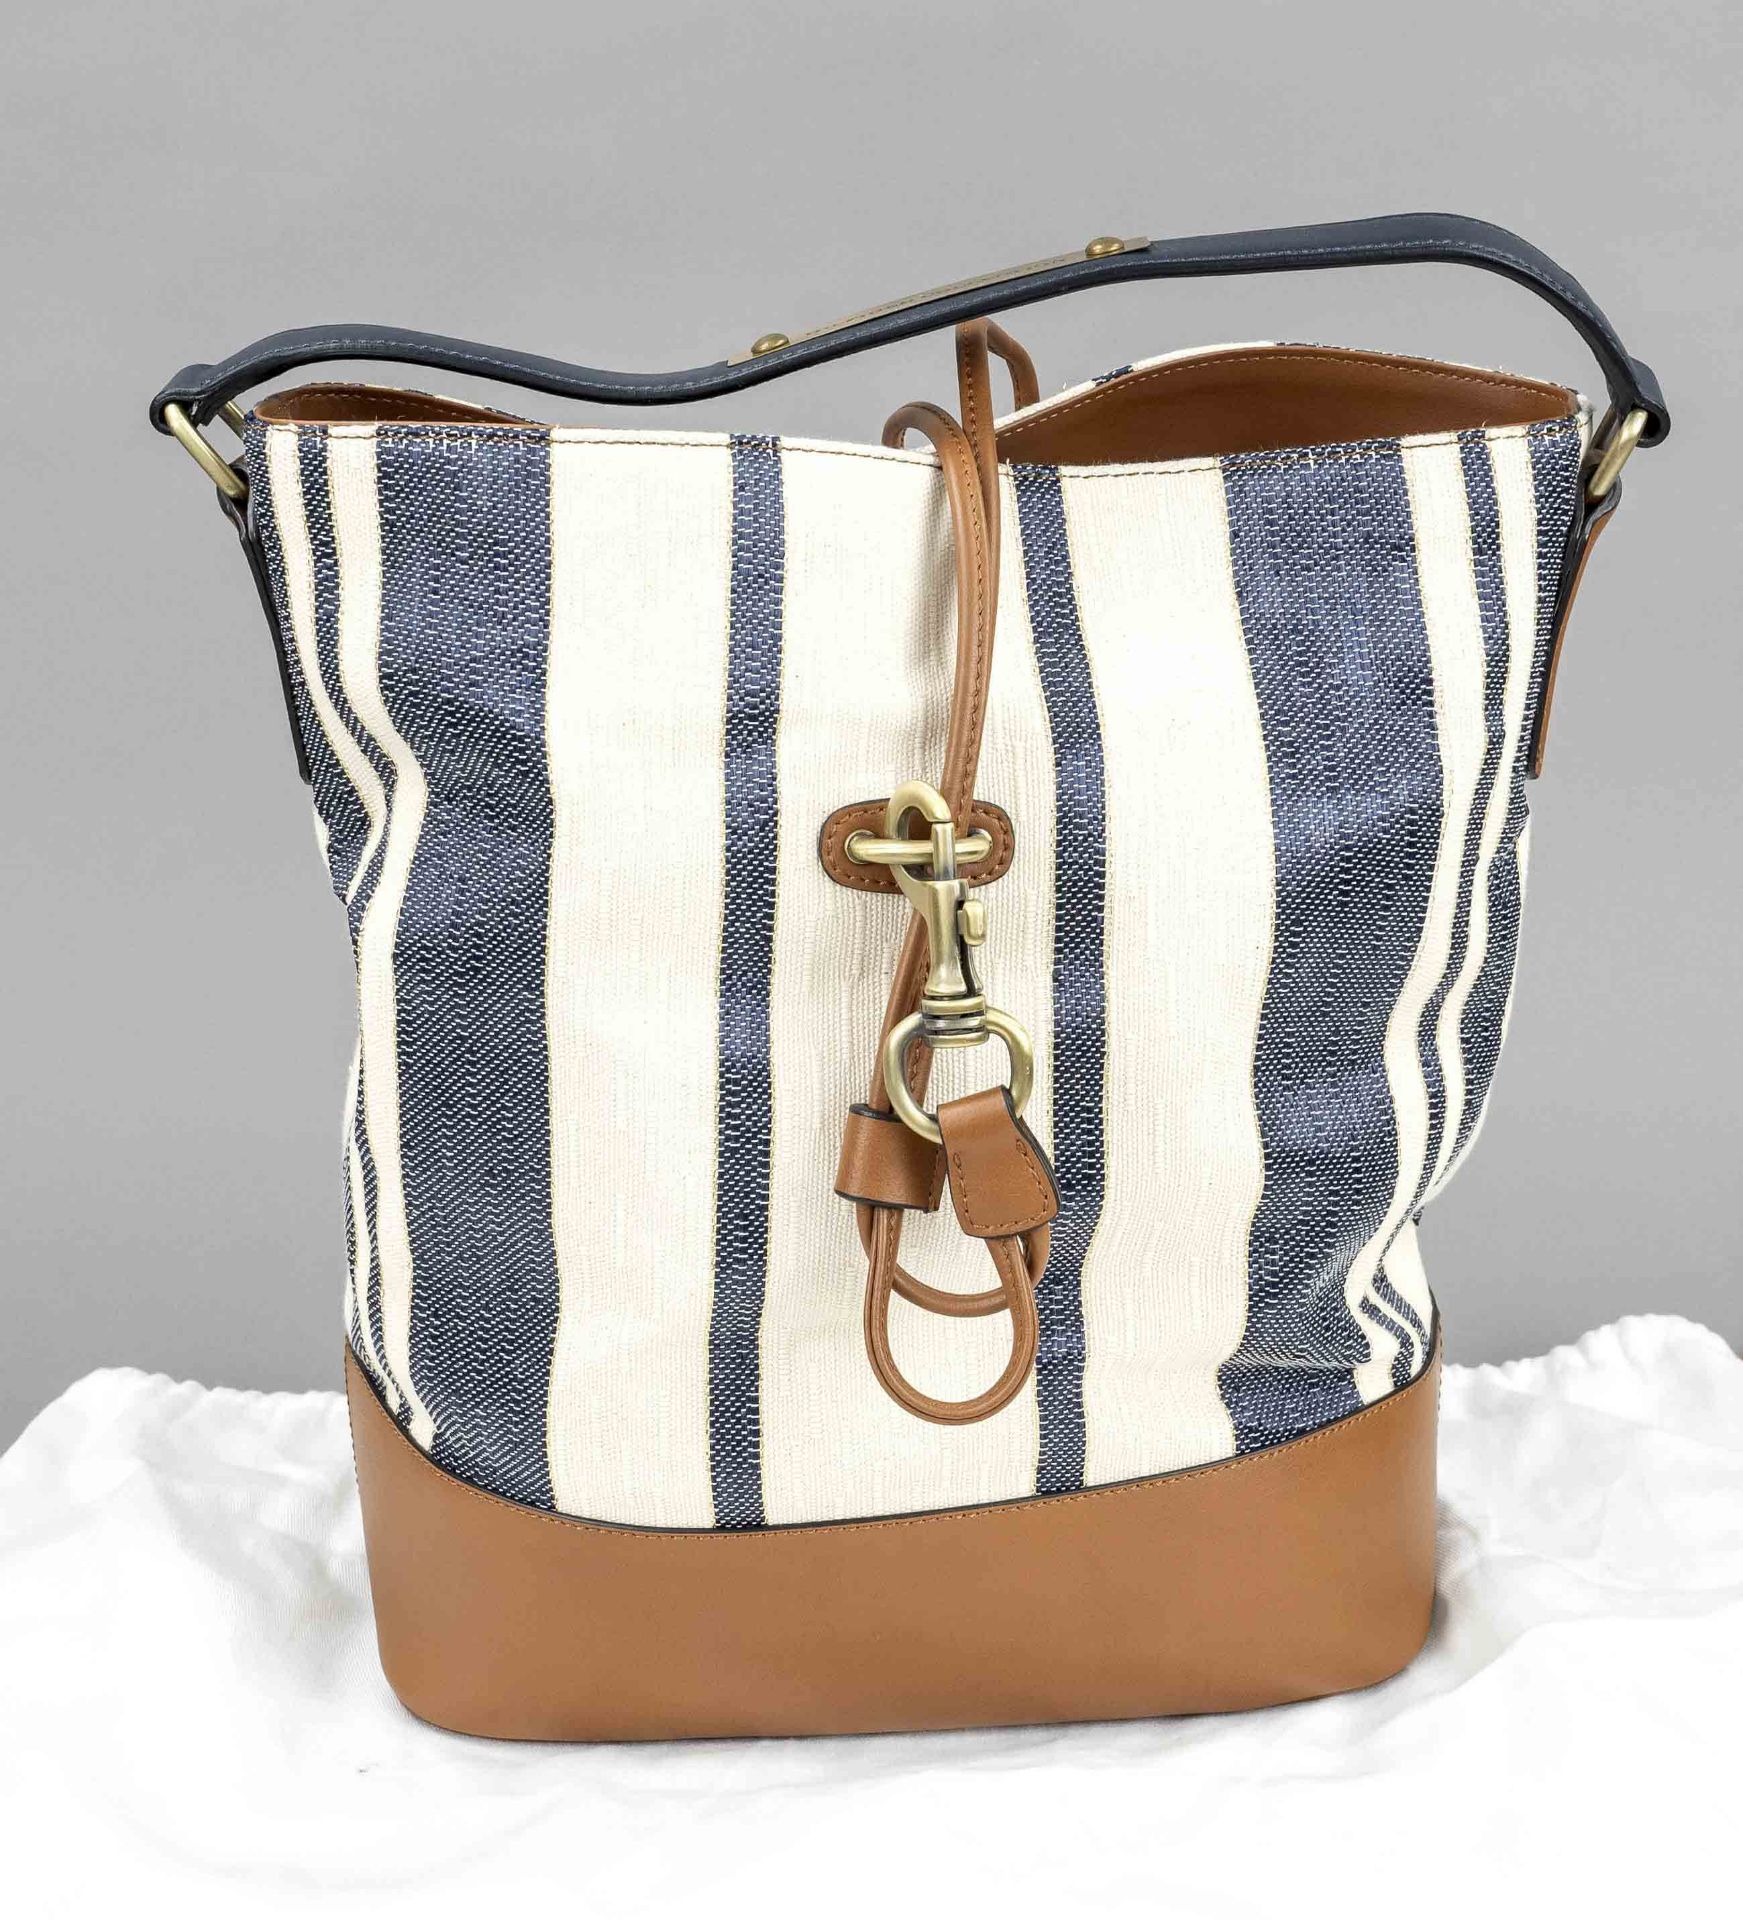 Hilfiger Collection, Striped Canvas Bucket Bag, blue and white striped fabric with incorporated gold